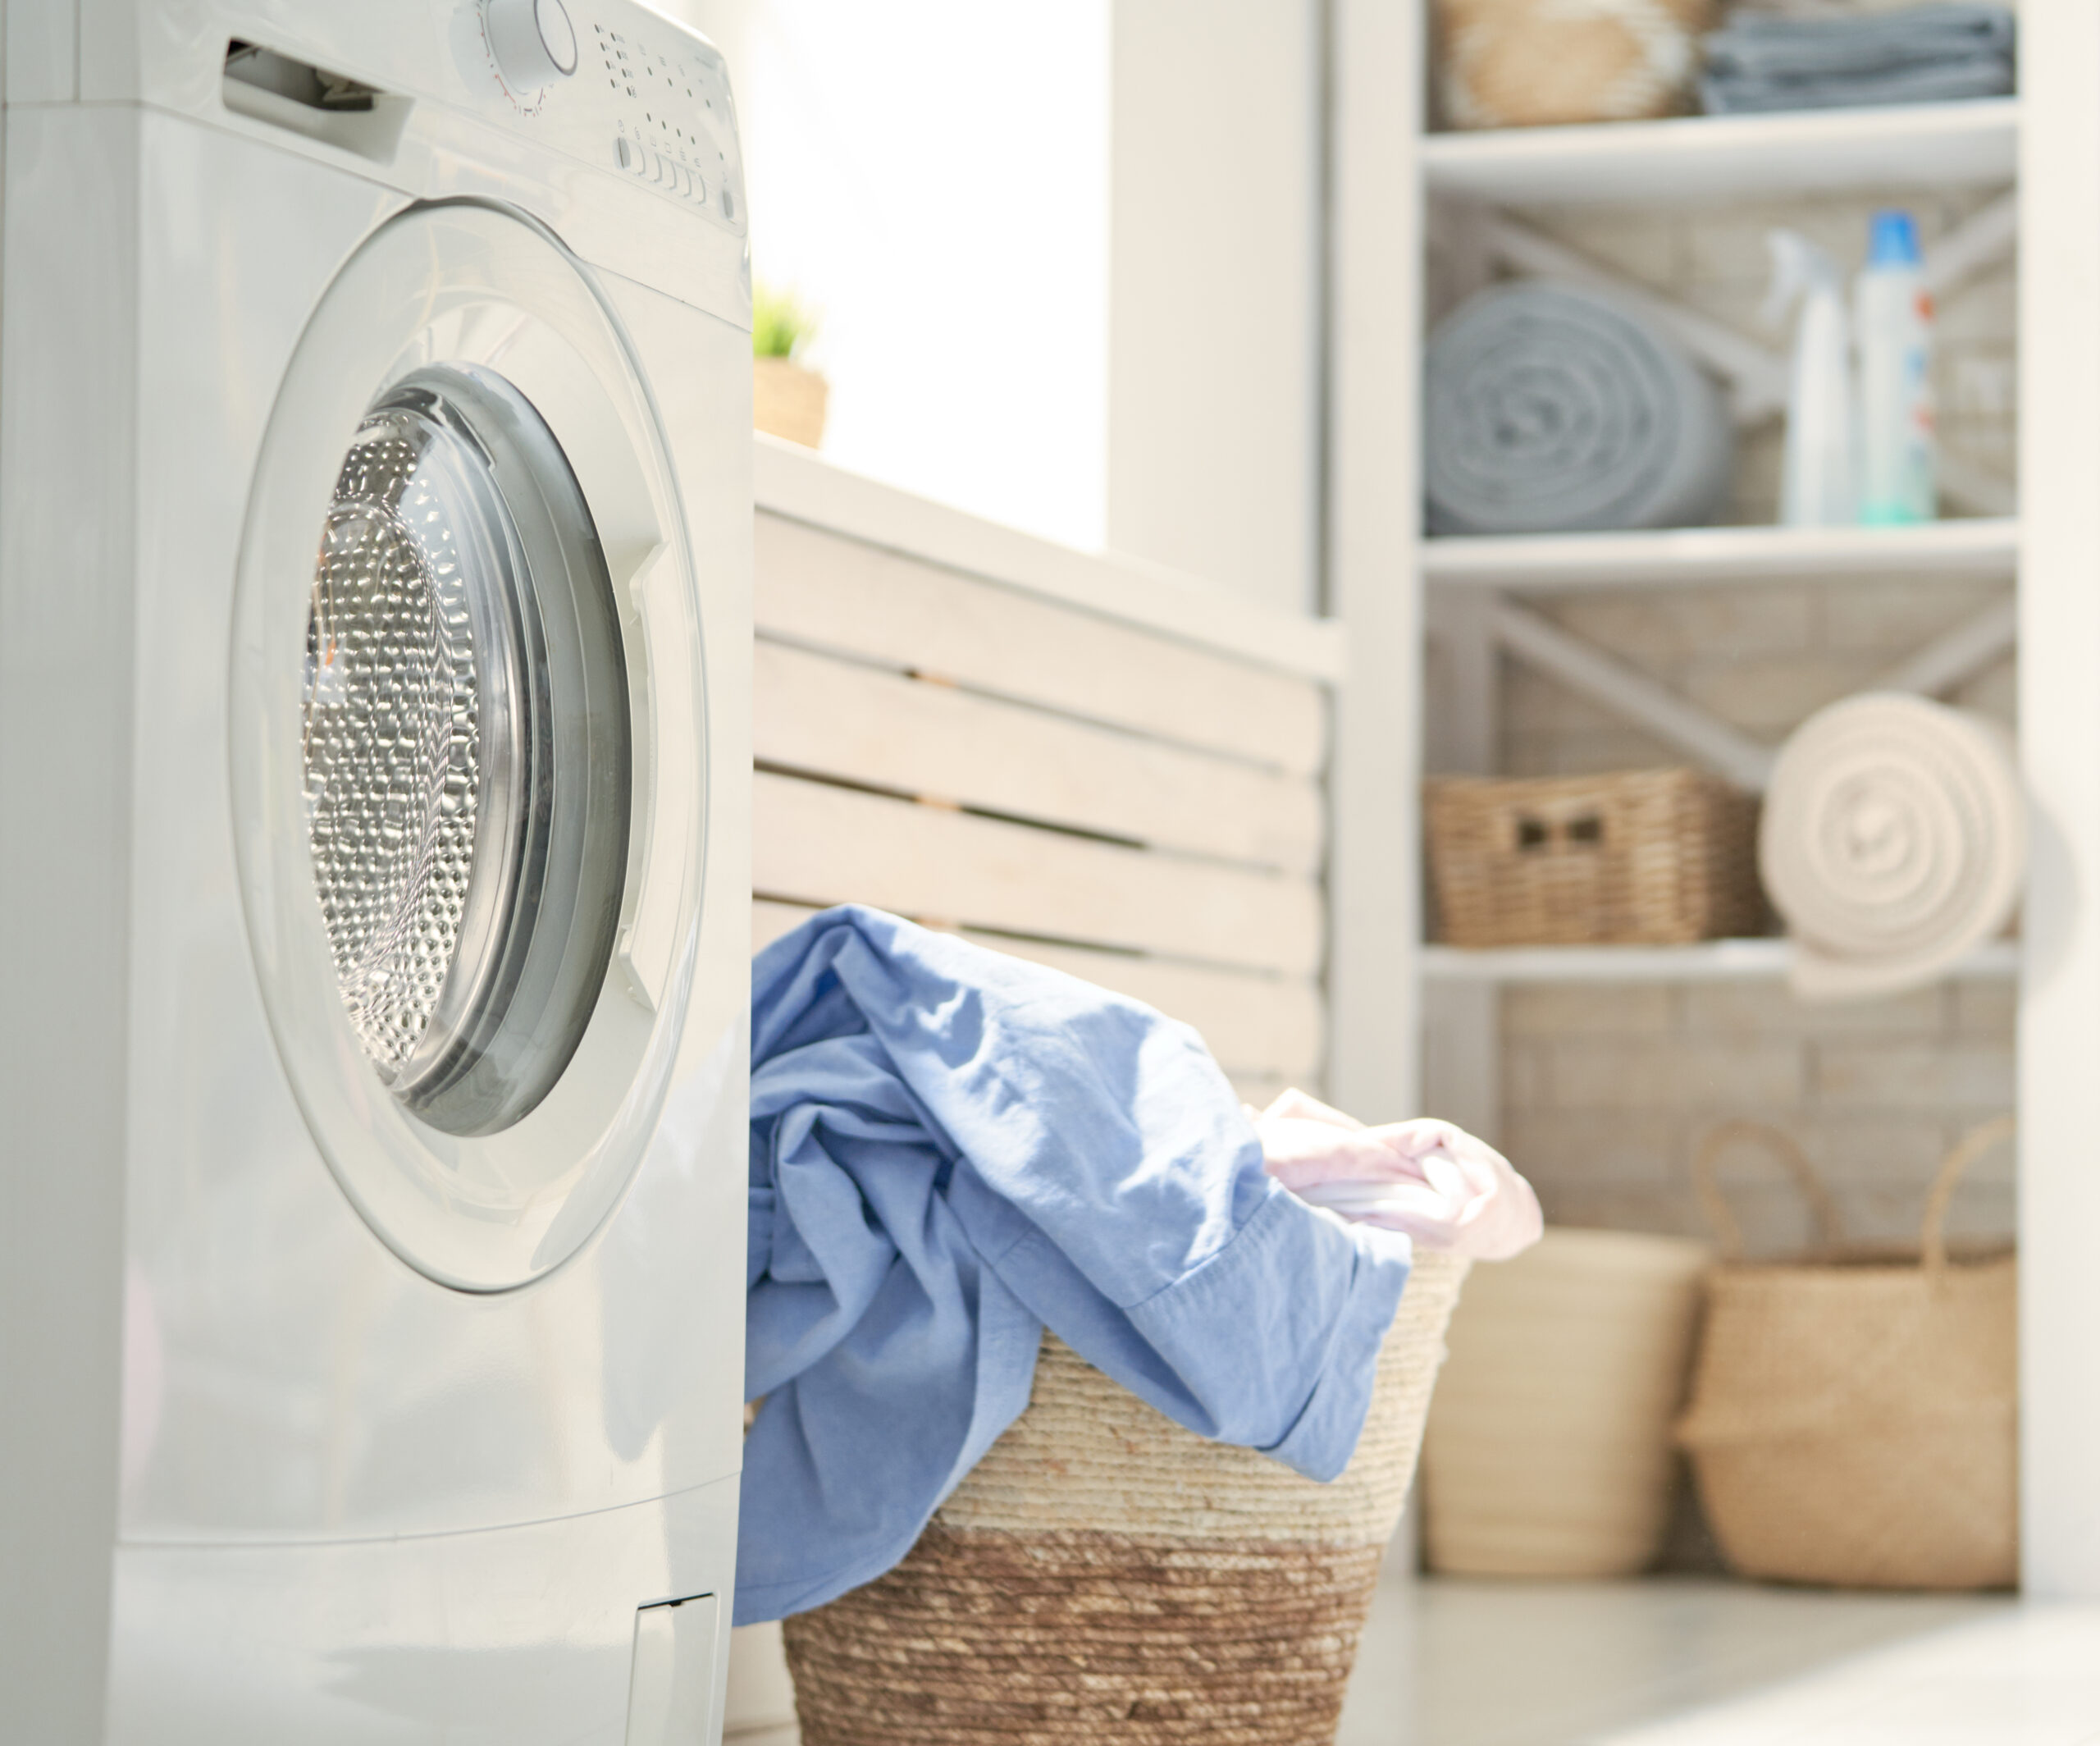 7 Helpful Tips When Organizing Your Very Small Laundry Room